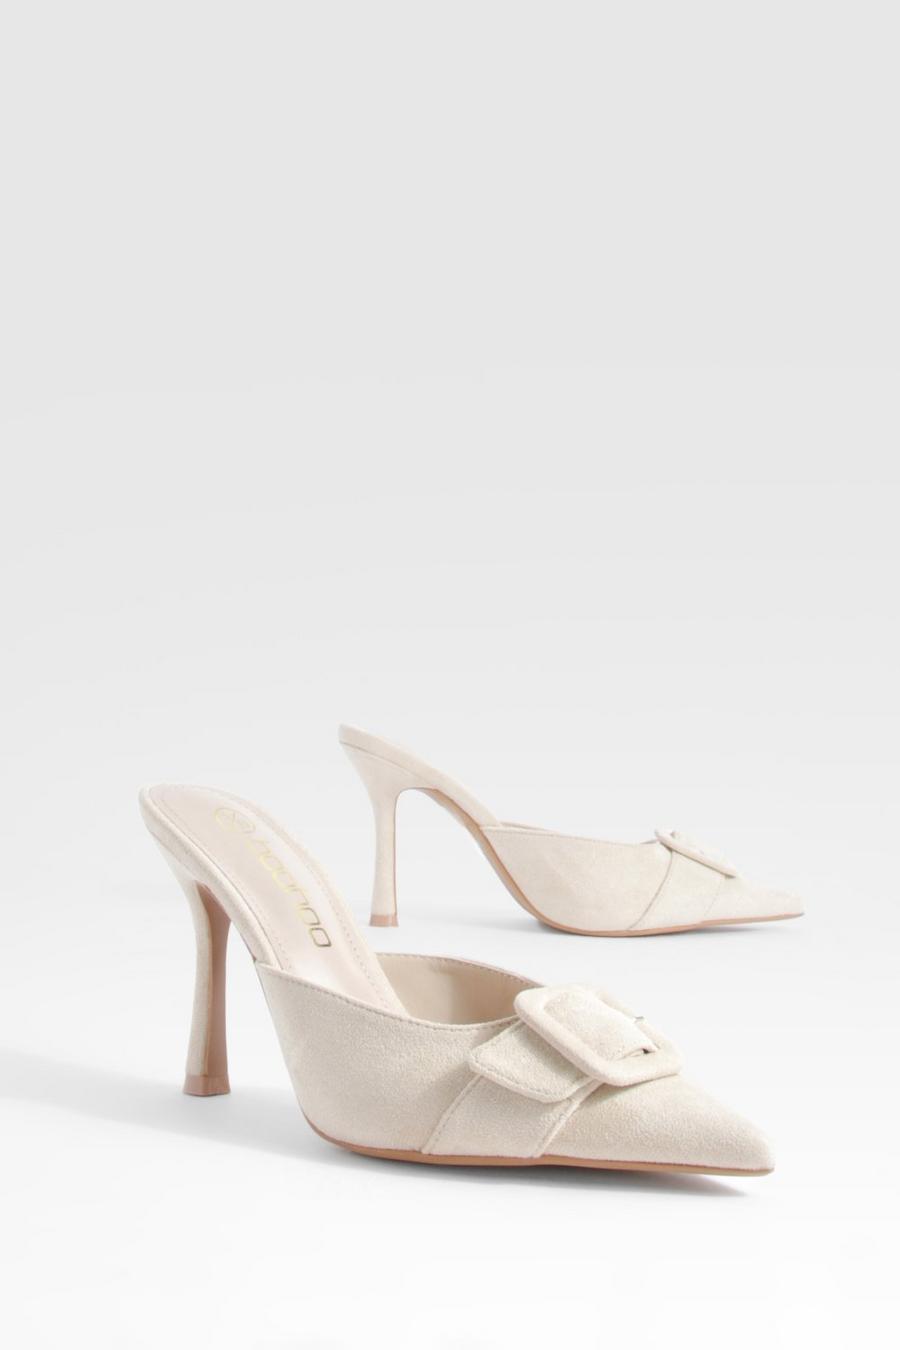 Sand Covered Buckle Mule Pumps